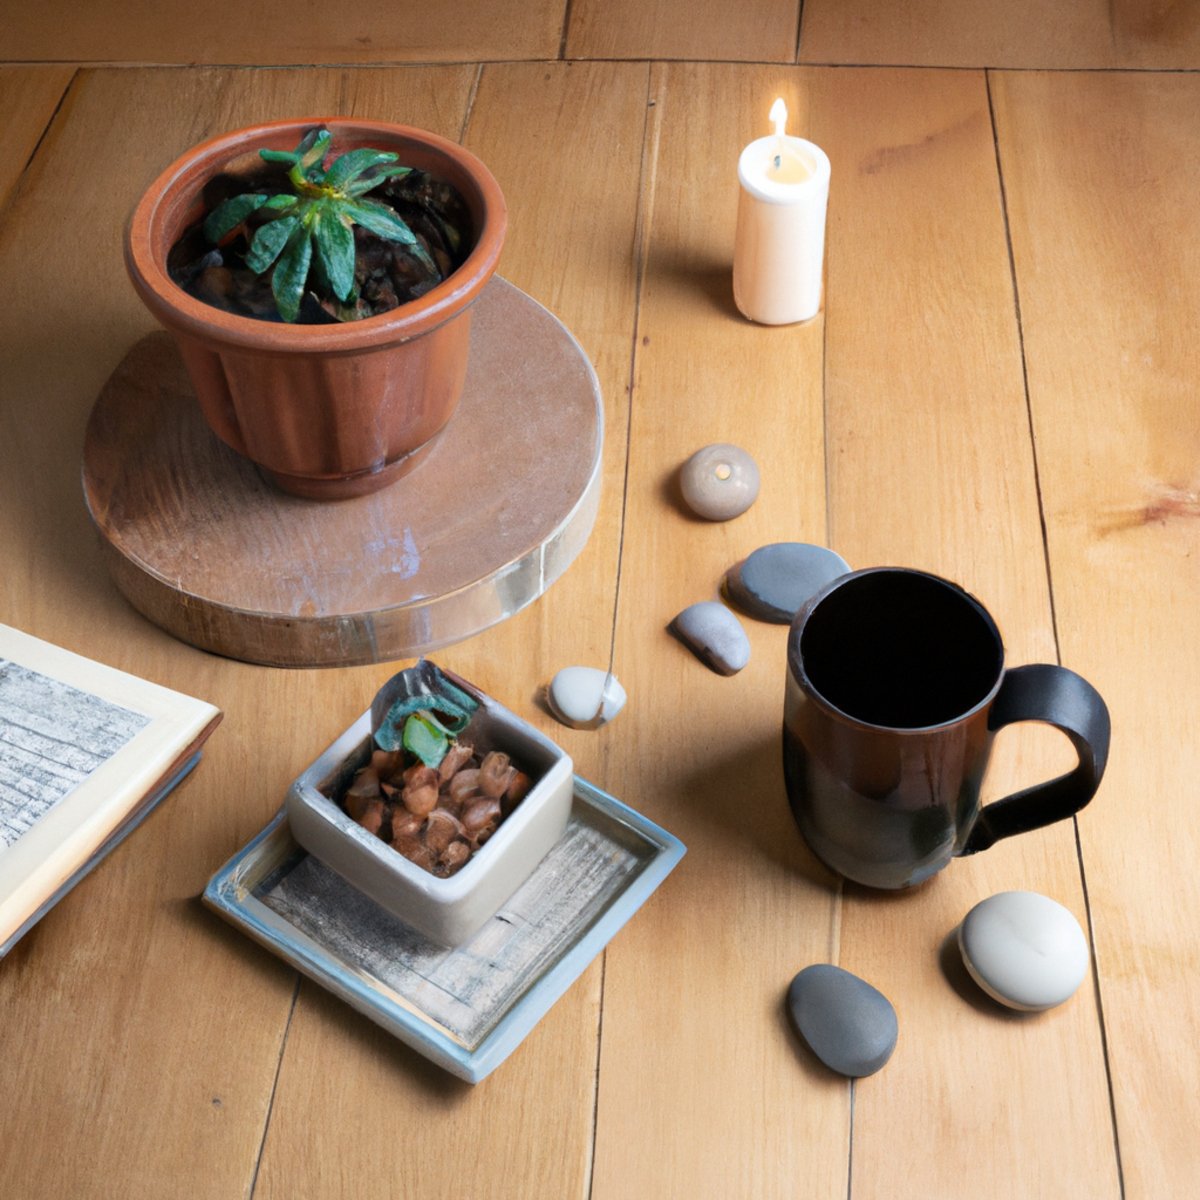 Mindful scene with succulent, tea, book, and candle.